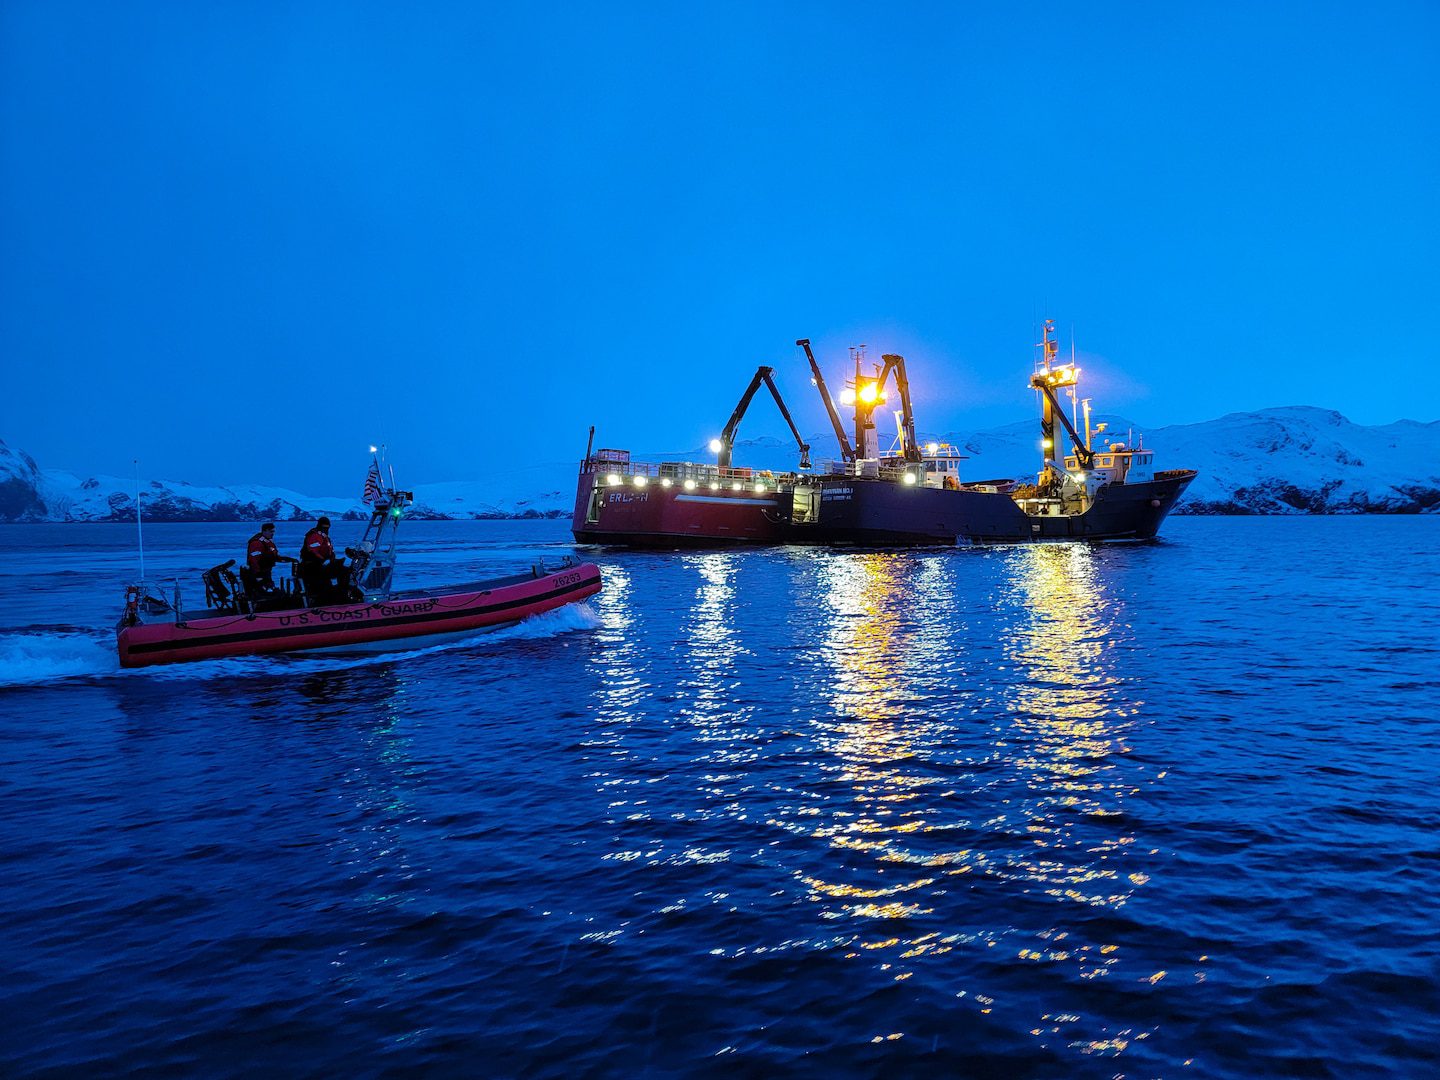 Coast Guard Cutter Alex Haley (WMEC-39) towed disabled fishing vessel Aleutian No. 1 more than 160 miles to safe harbor in Adak, Alaska, Jan. 1, 2024, after it experienced a loss of propulsion 575 miles southwest of Dutch Harbor, Alaska, and was unable to effect repairs.